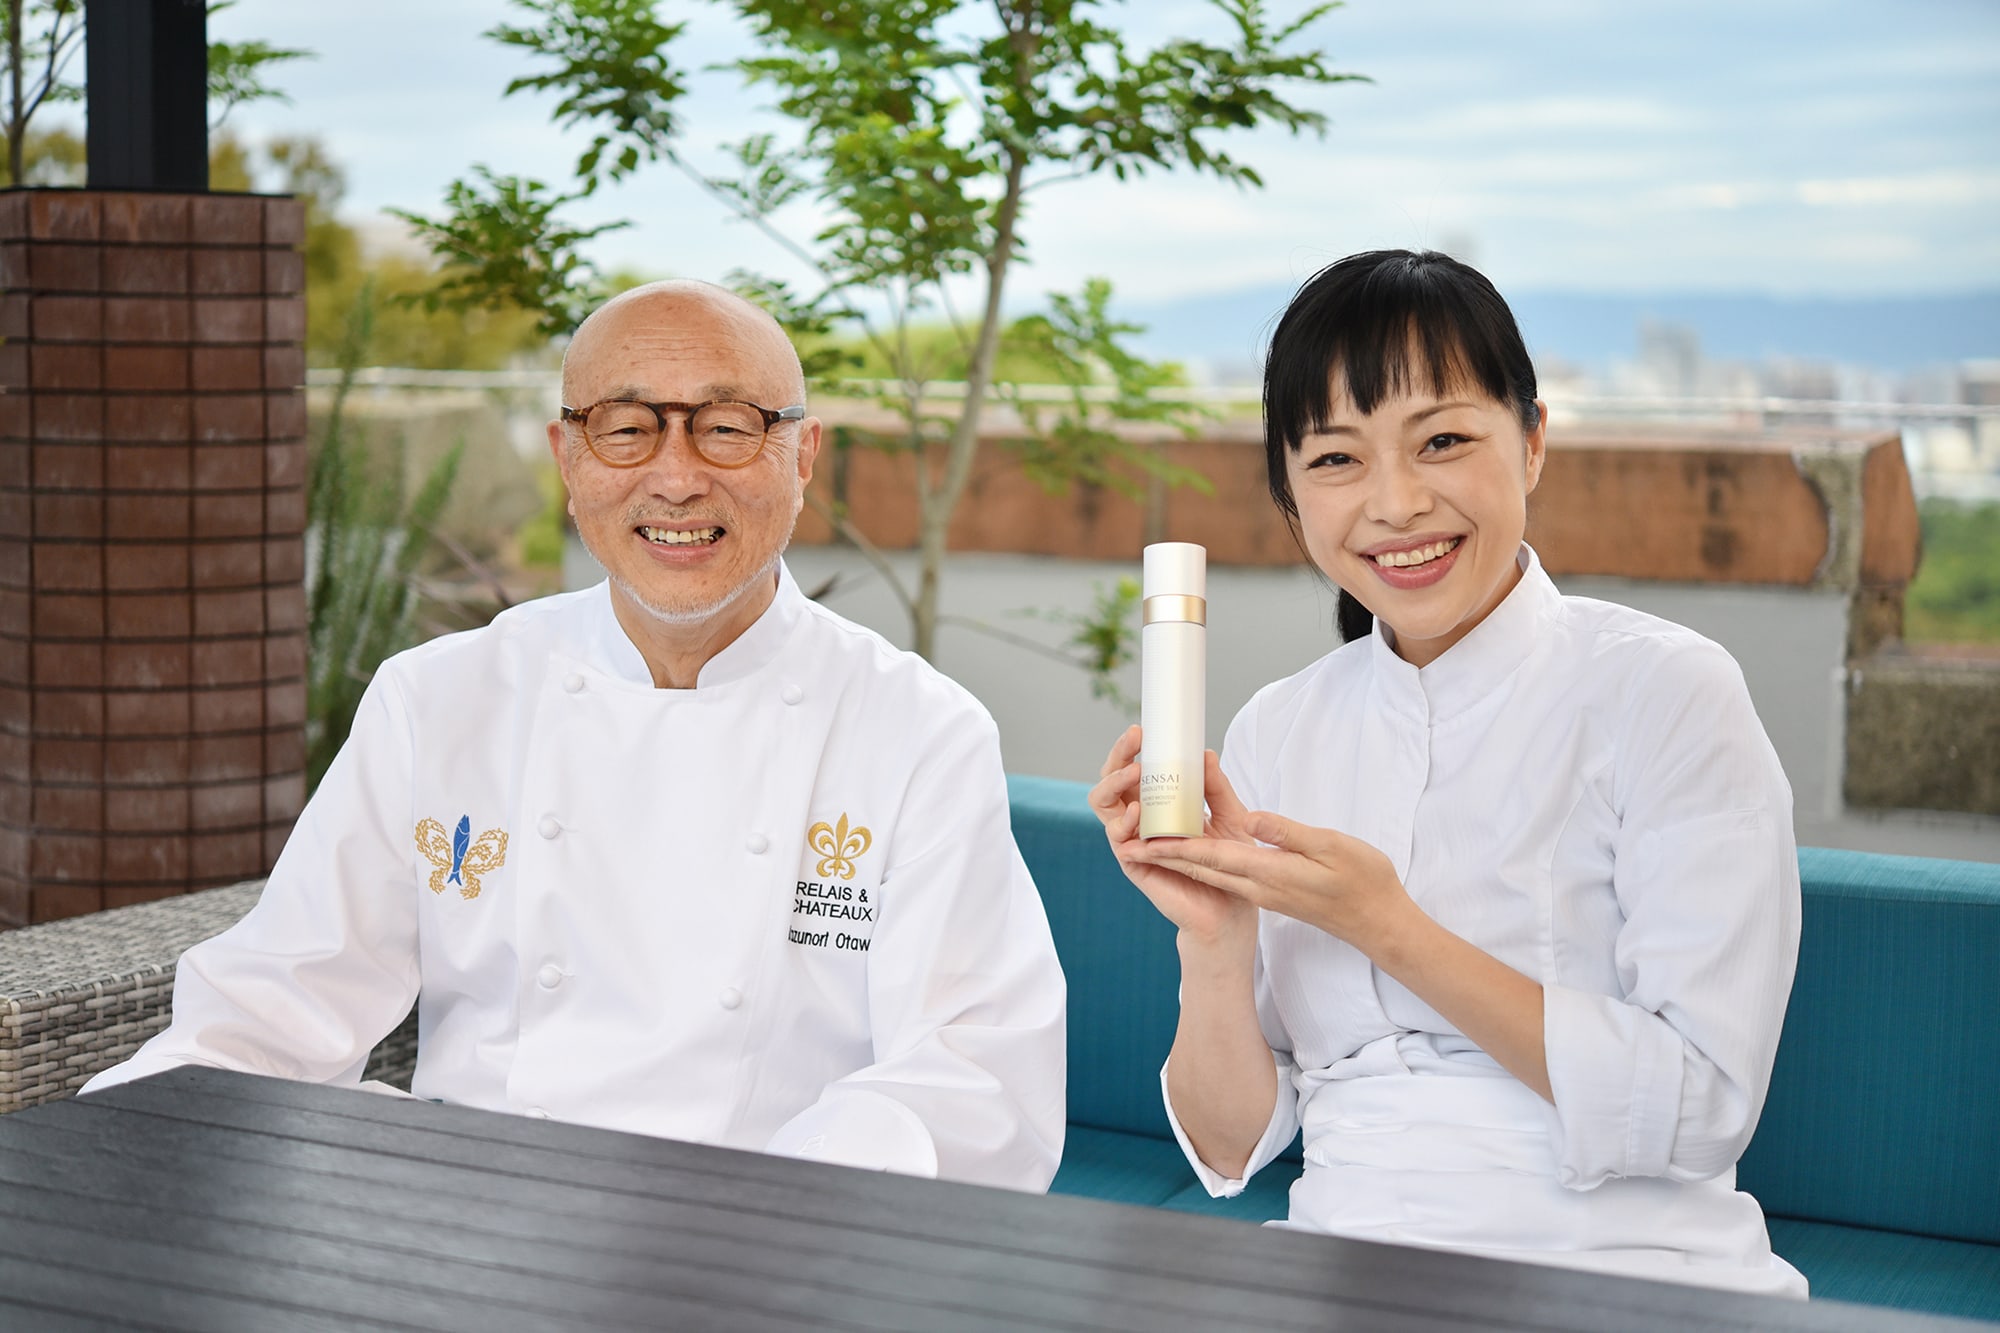 Kazuki Otowa and Asuka Otowa from the Otowa Restaurant. The restaurant is a member of the Relais & Châteaux. The two have created the Oeuf a la Neige SENSAI specially for the Grand Gala Dinner.